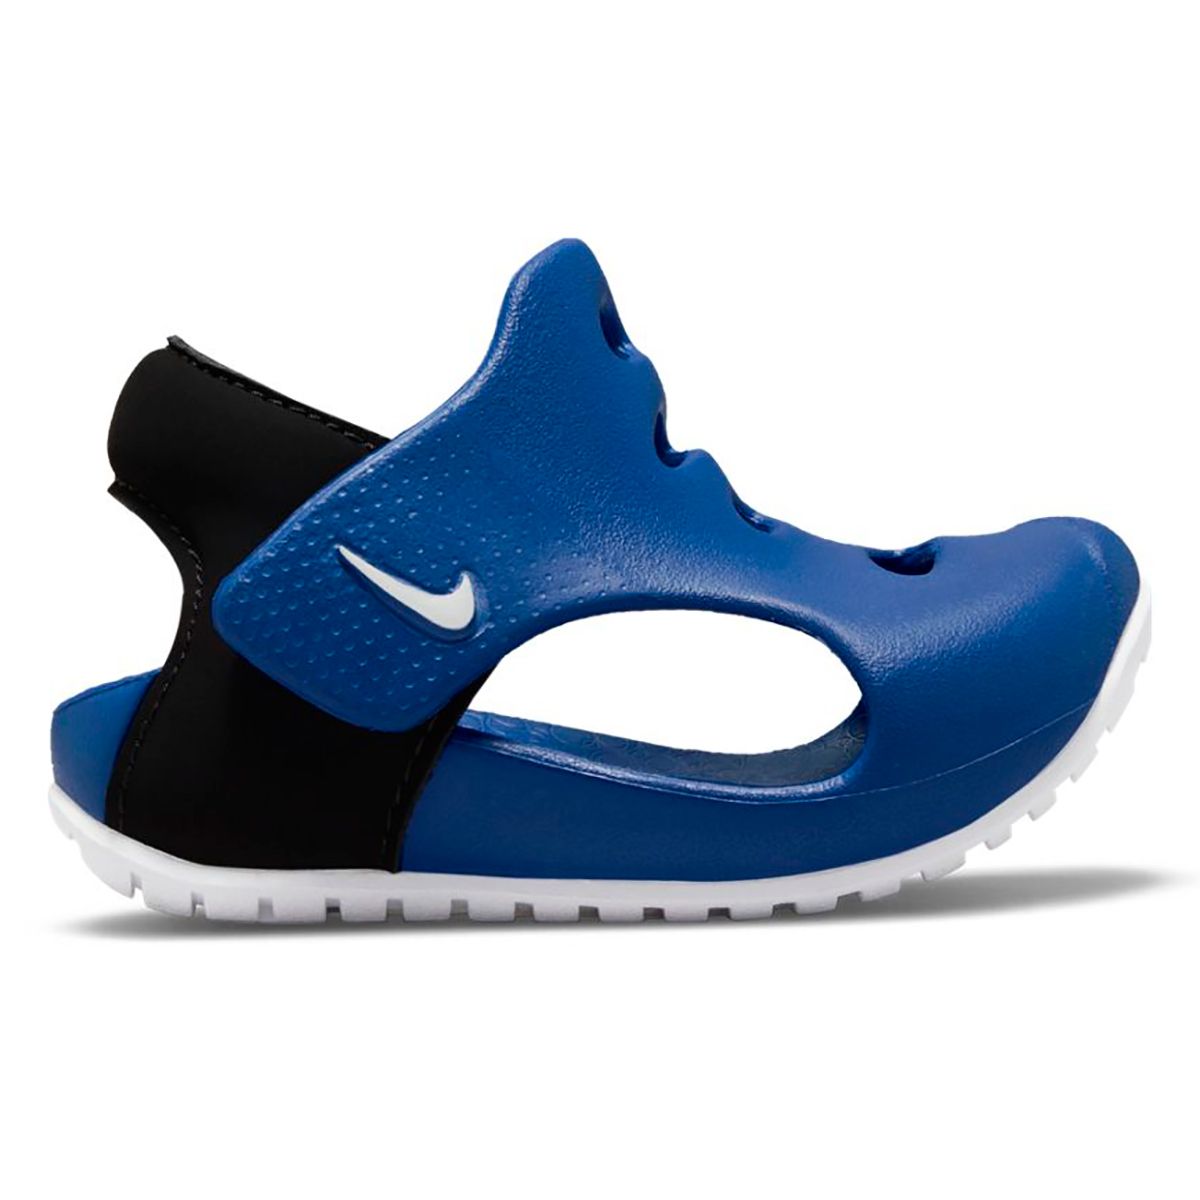 Toddler Sandals DH9465-400 3 Nike Protect Sunray